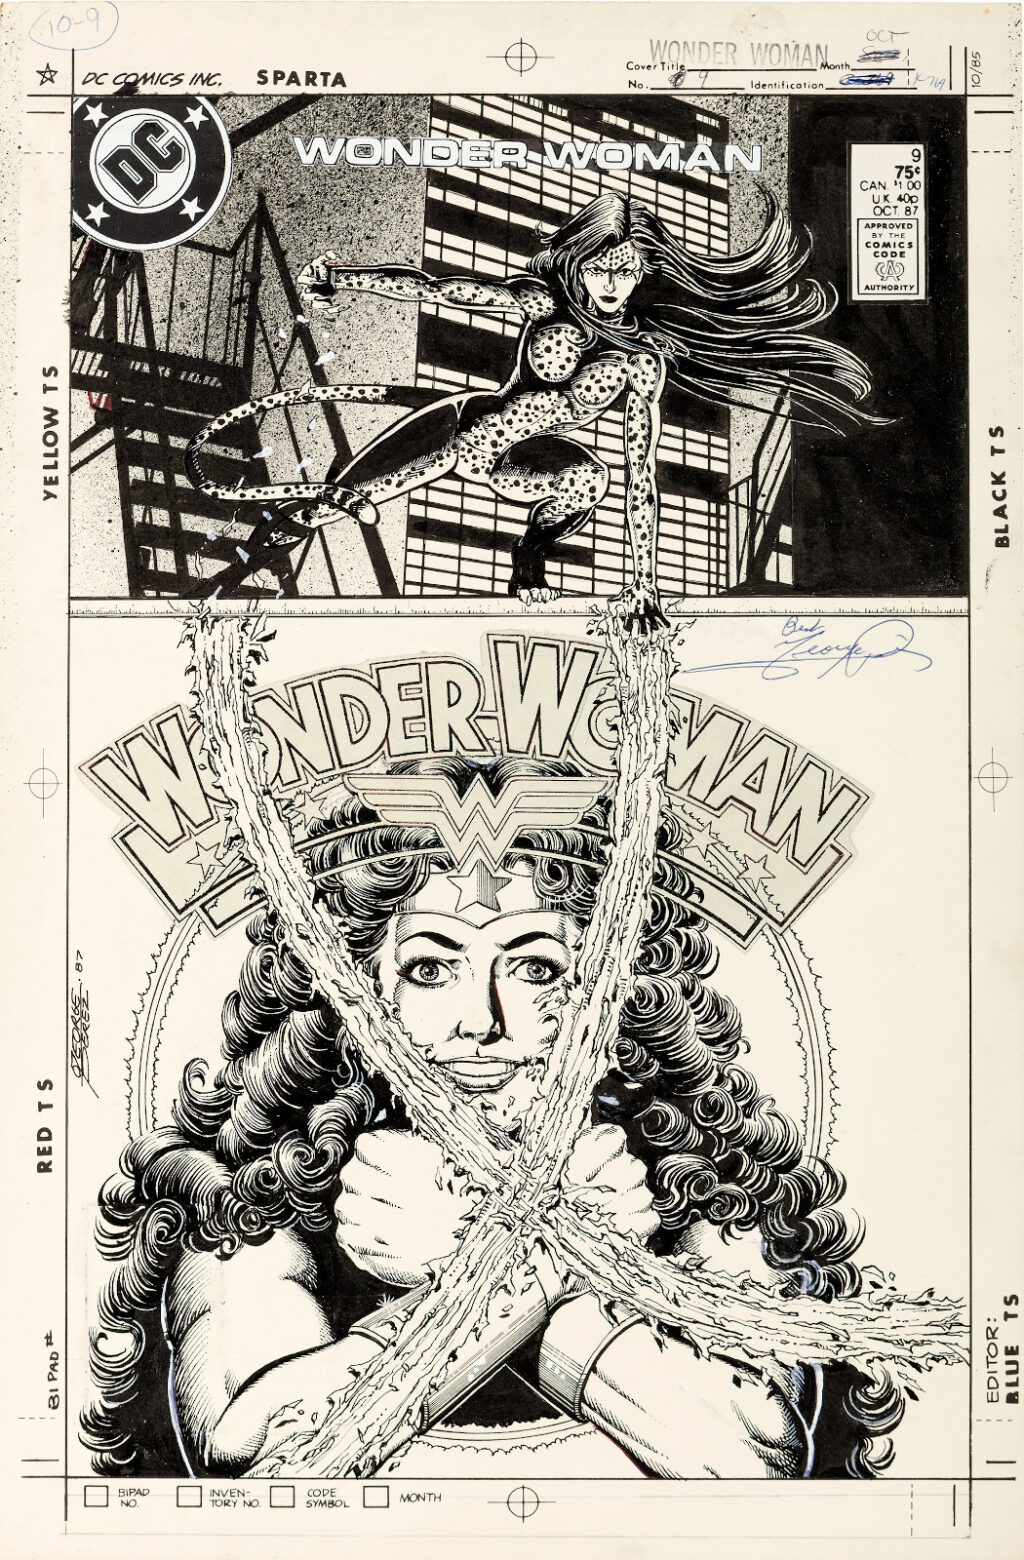 Wonder Woman issue 9 cover by George Perez